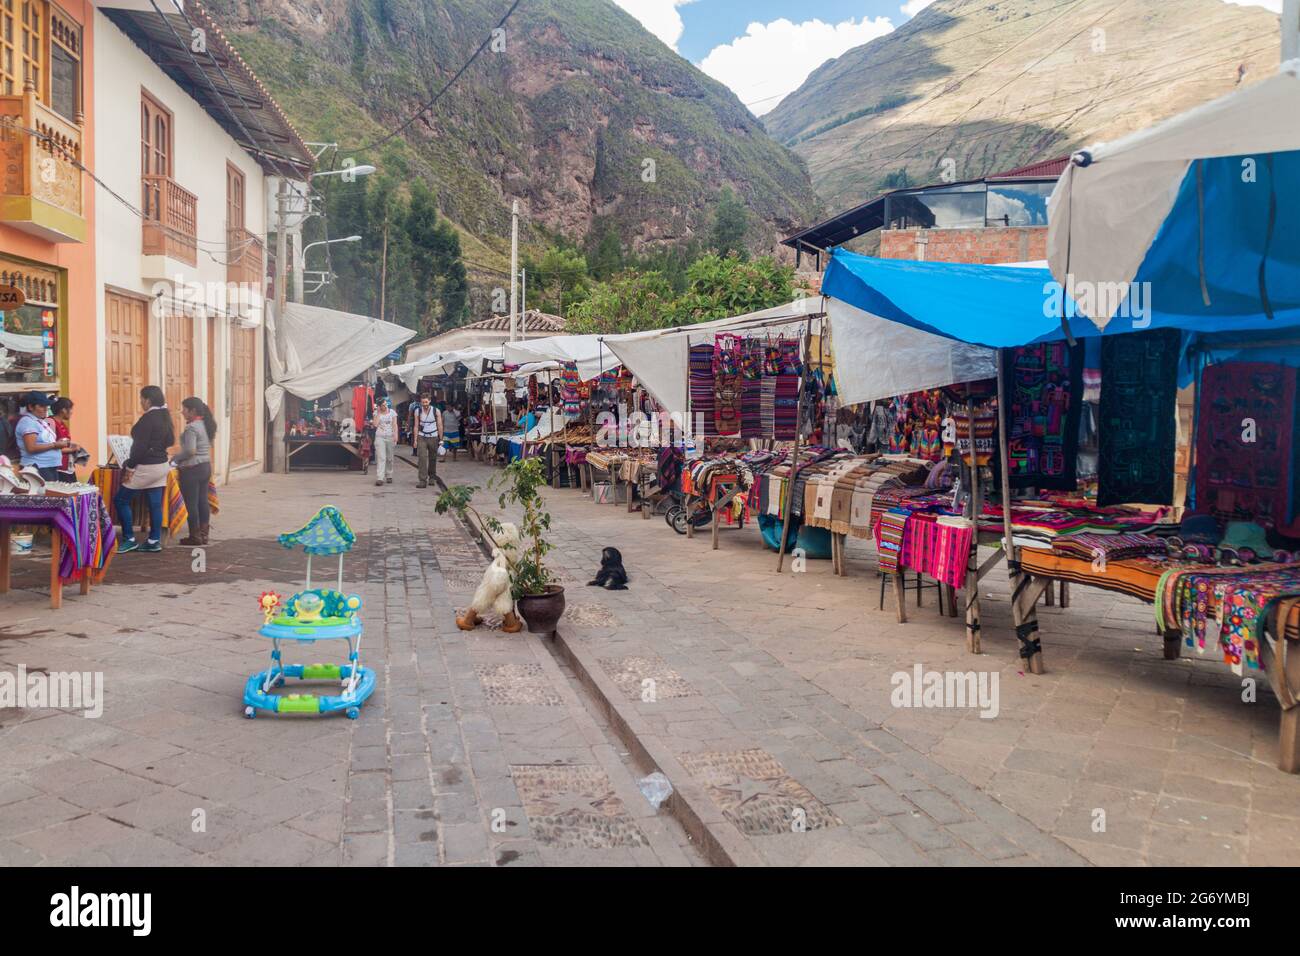 PISAC, PERU - MAY 22, 2015: Famous indigenous market in Pisac, Sacred Valley of Incas, Peru. Stock Photo